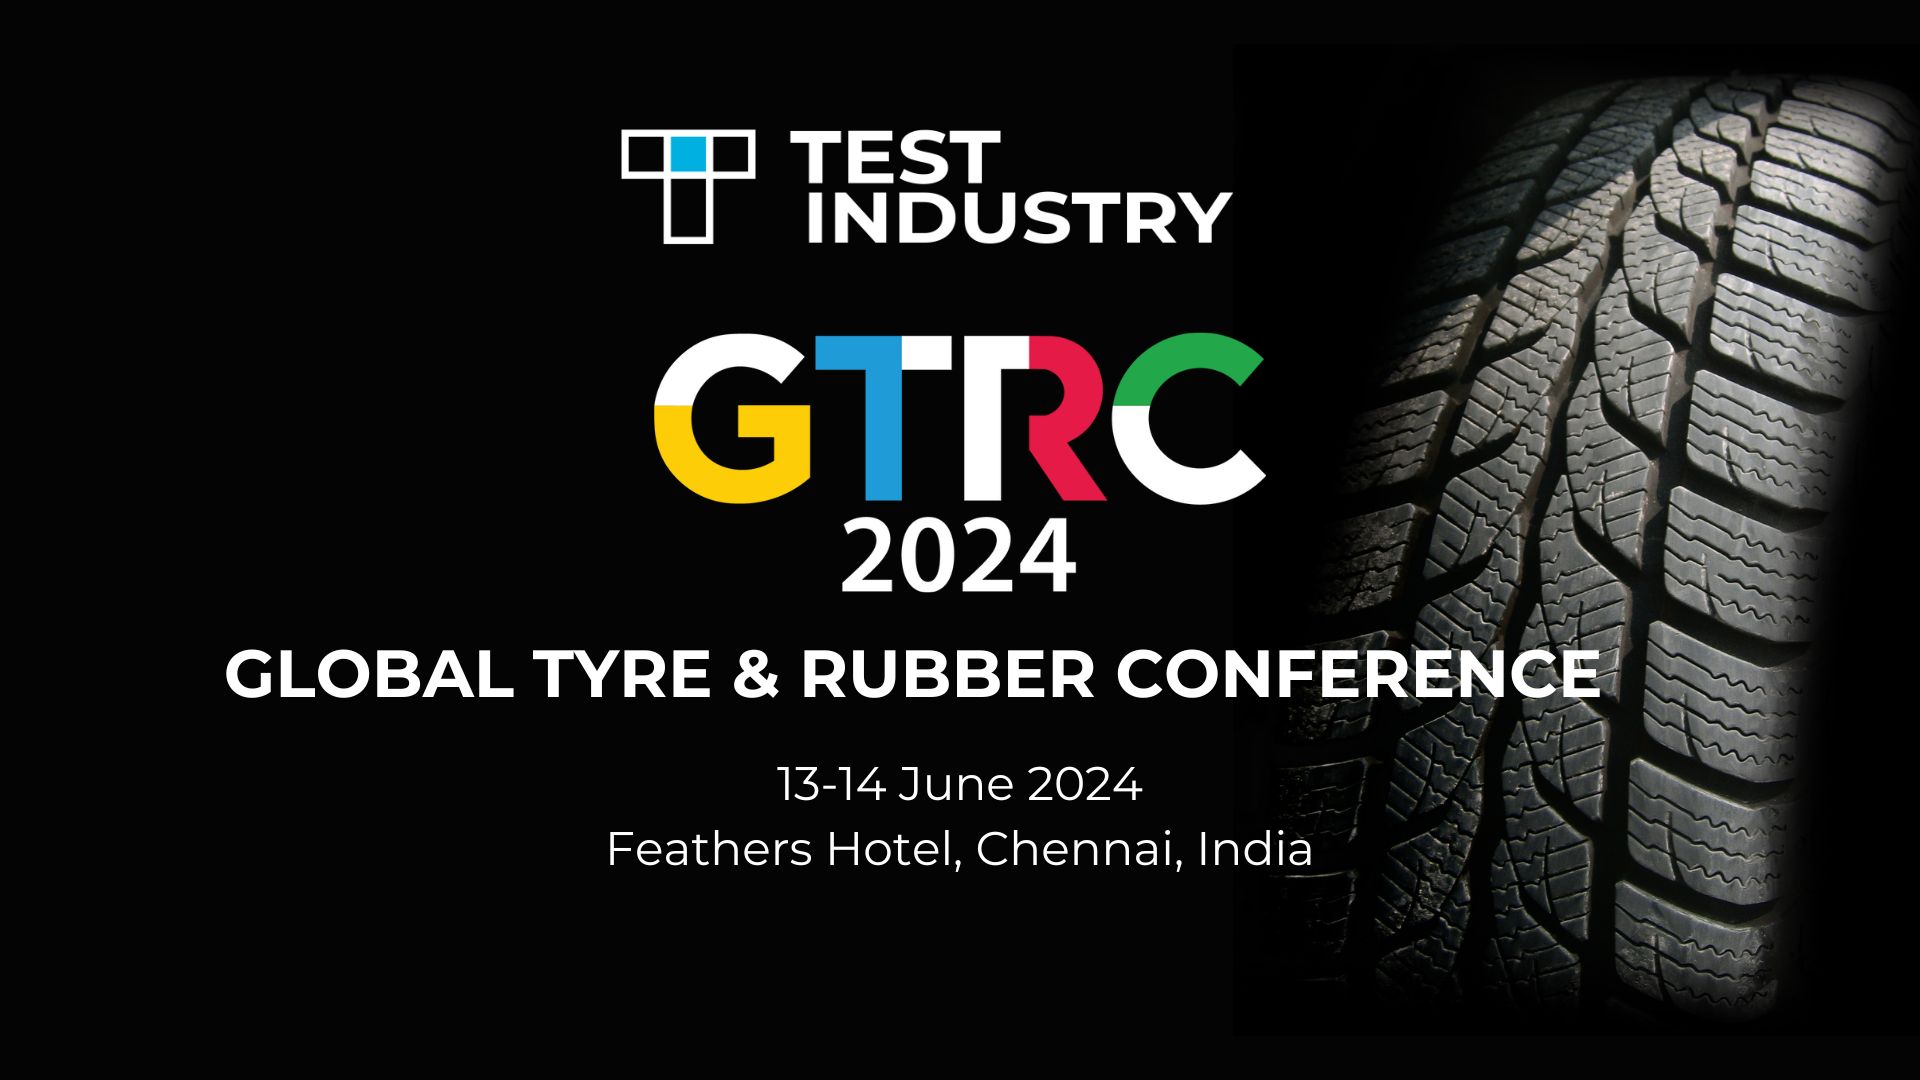 GLOBAL TYRE & RUBBER CONFERENCE